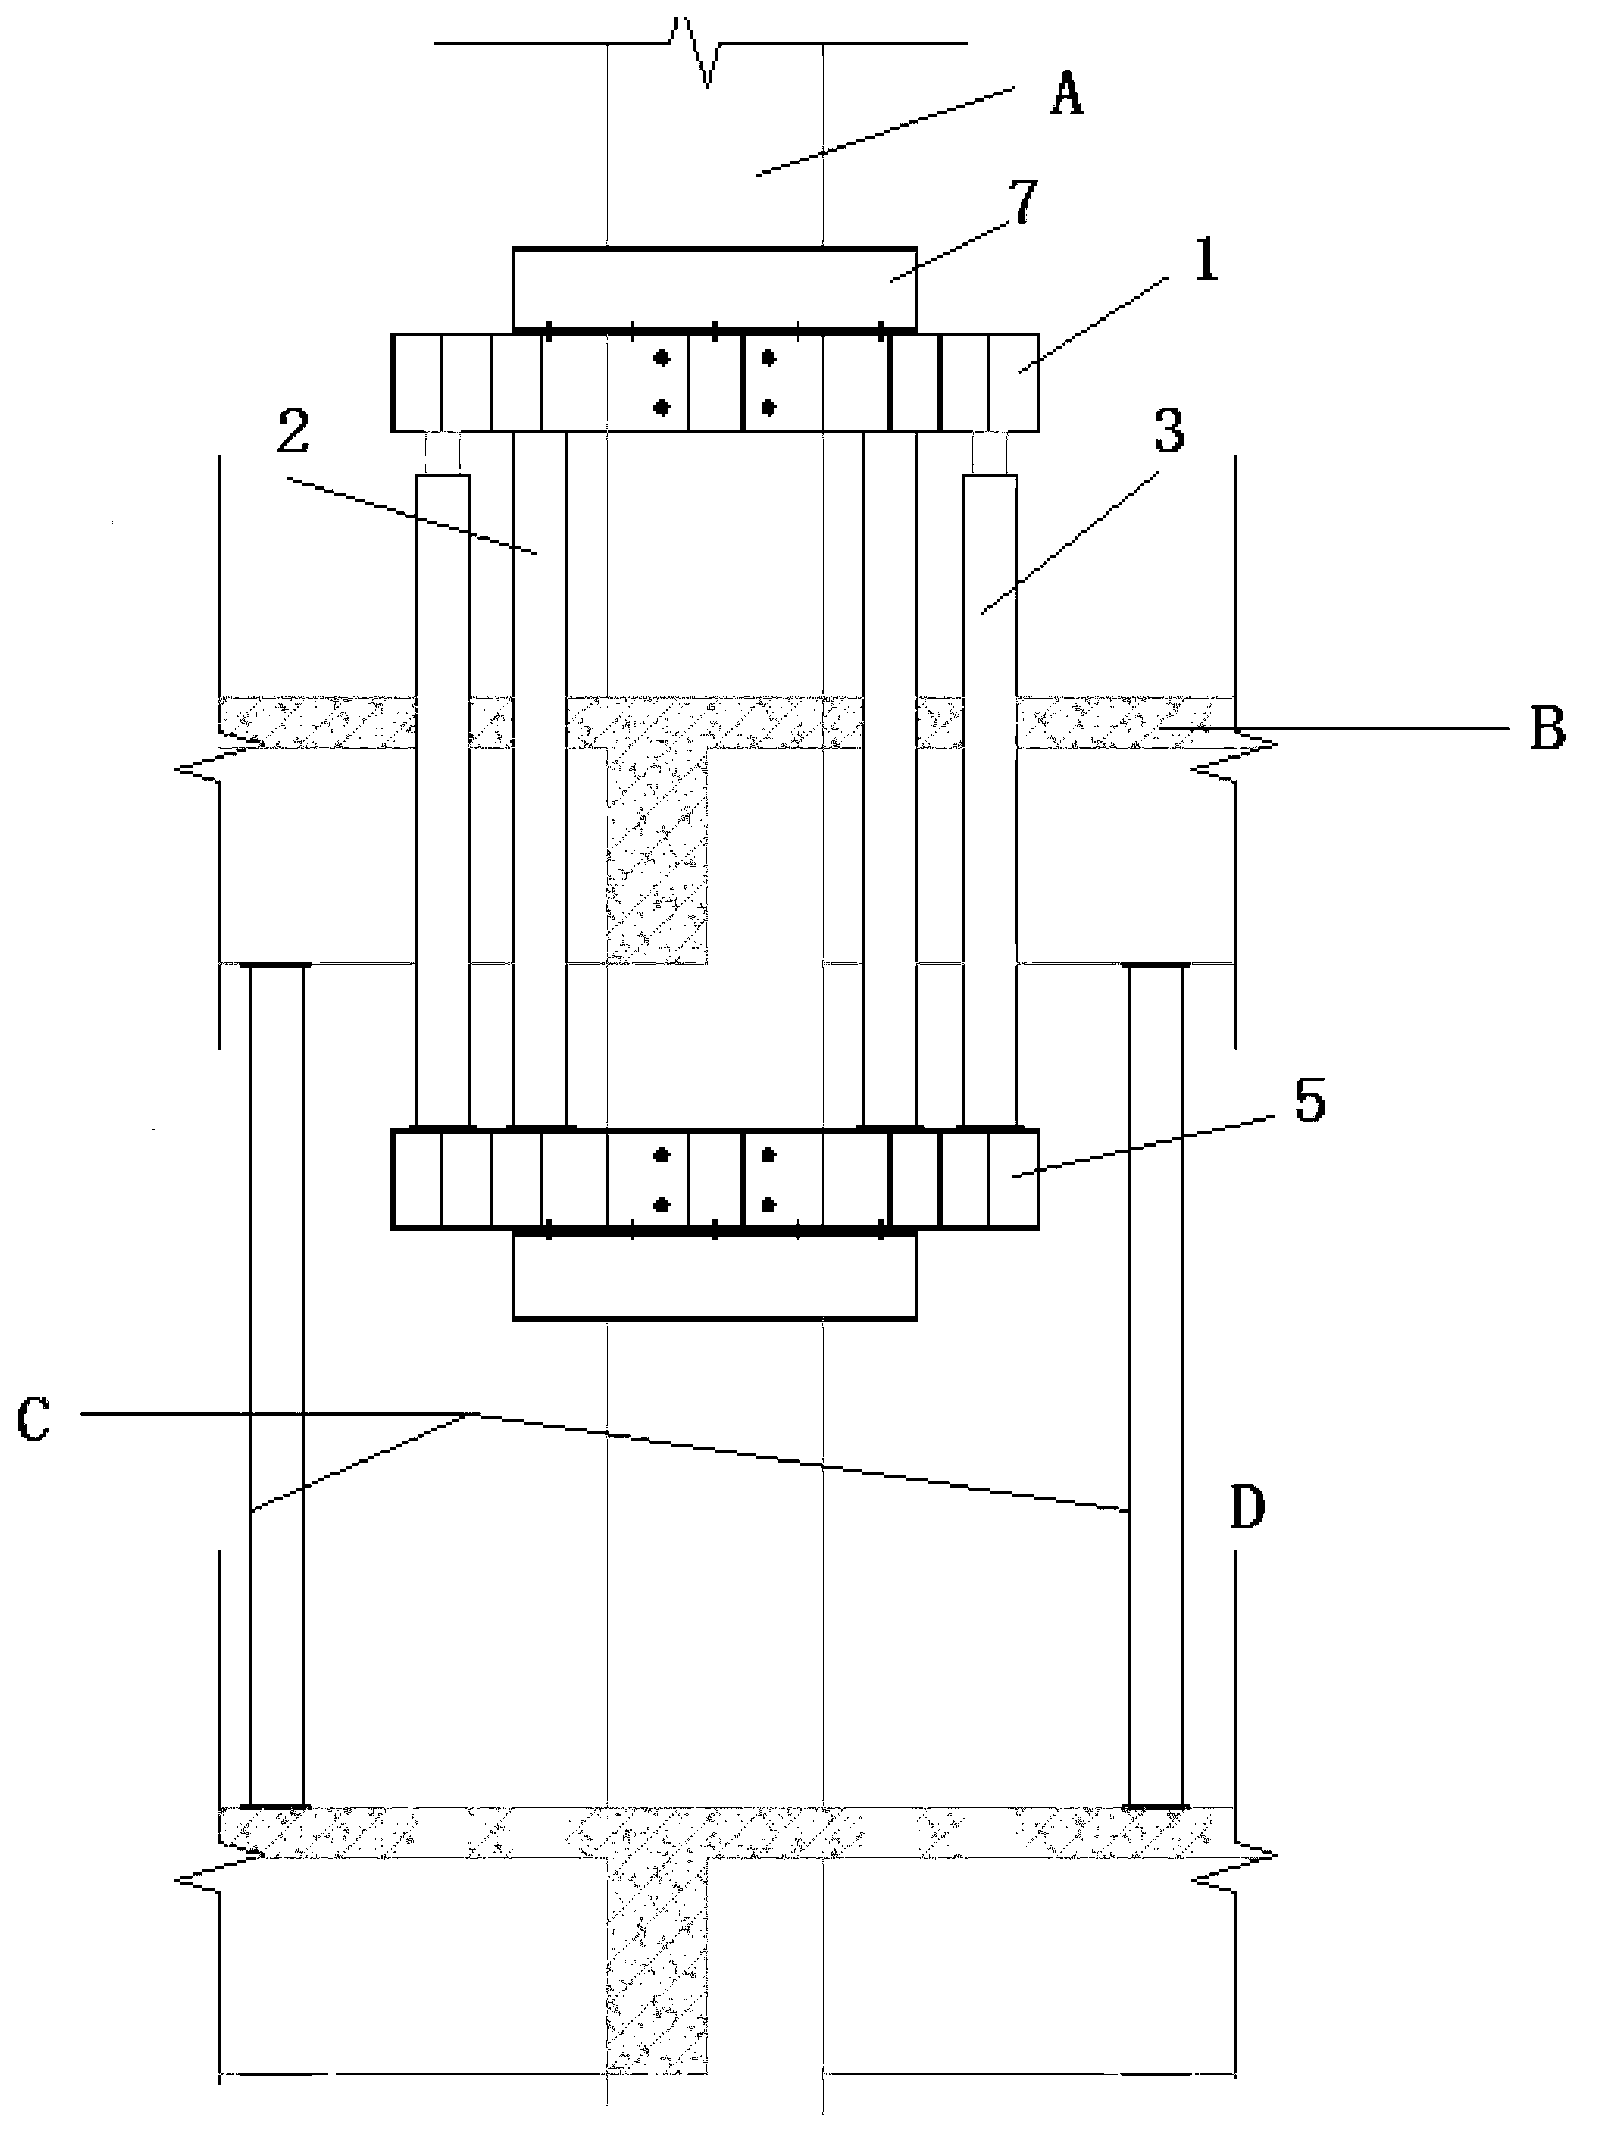 Steel tray supporting force transferring system